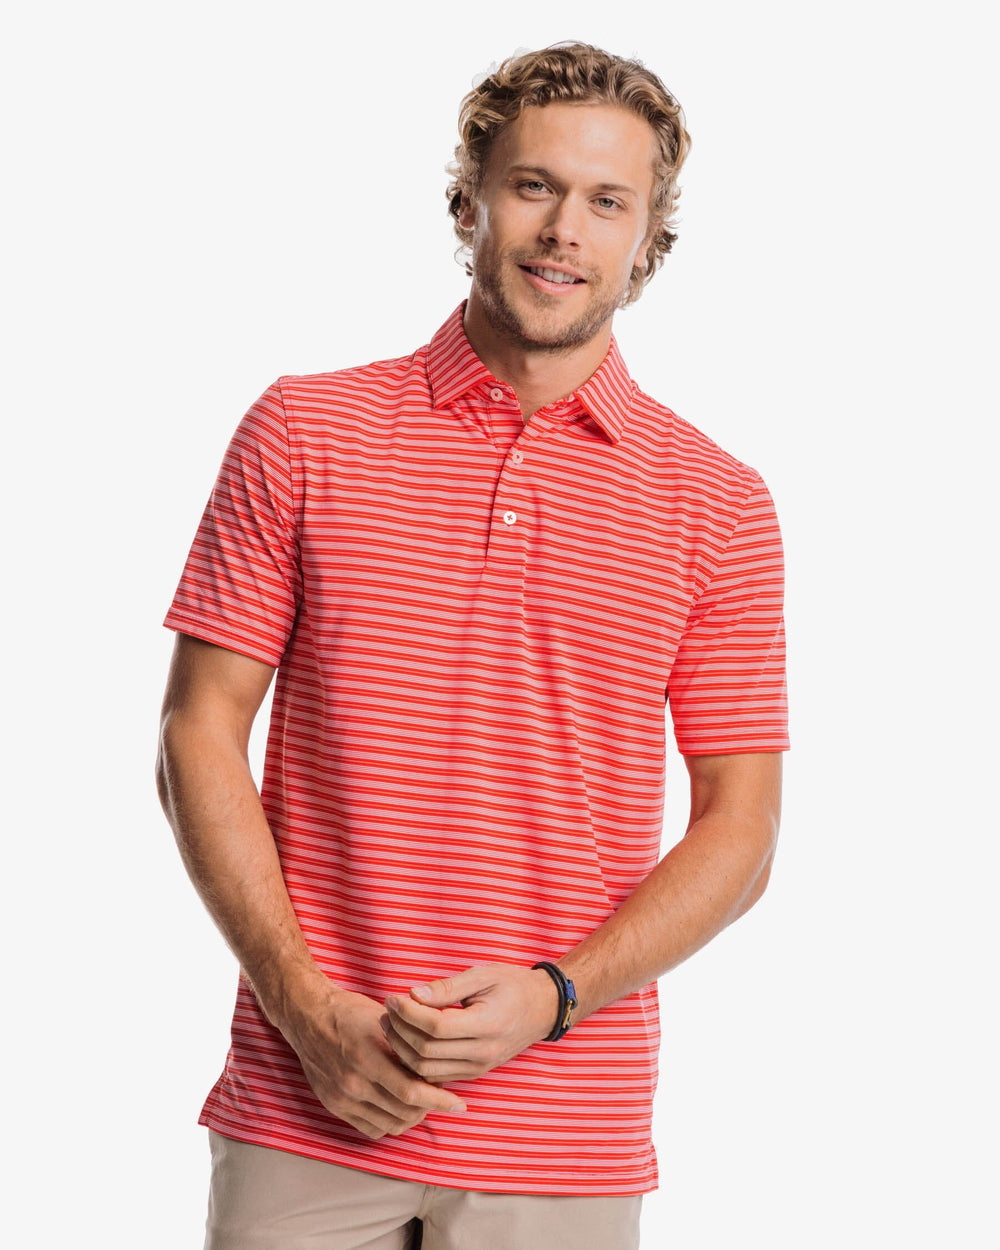 The front view of the Southern Tide Brrreeze Crawford Stripe Performance Polo Shirt by Southern Tide - Fire